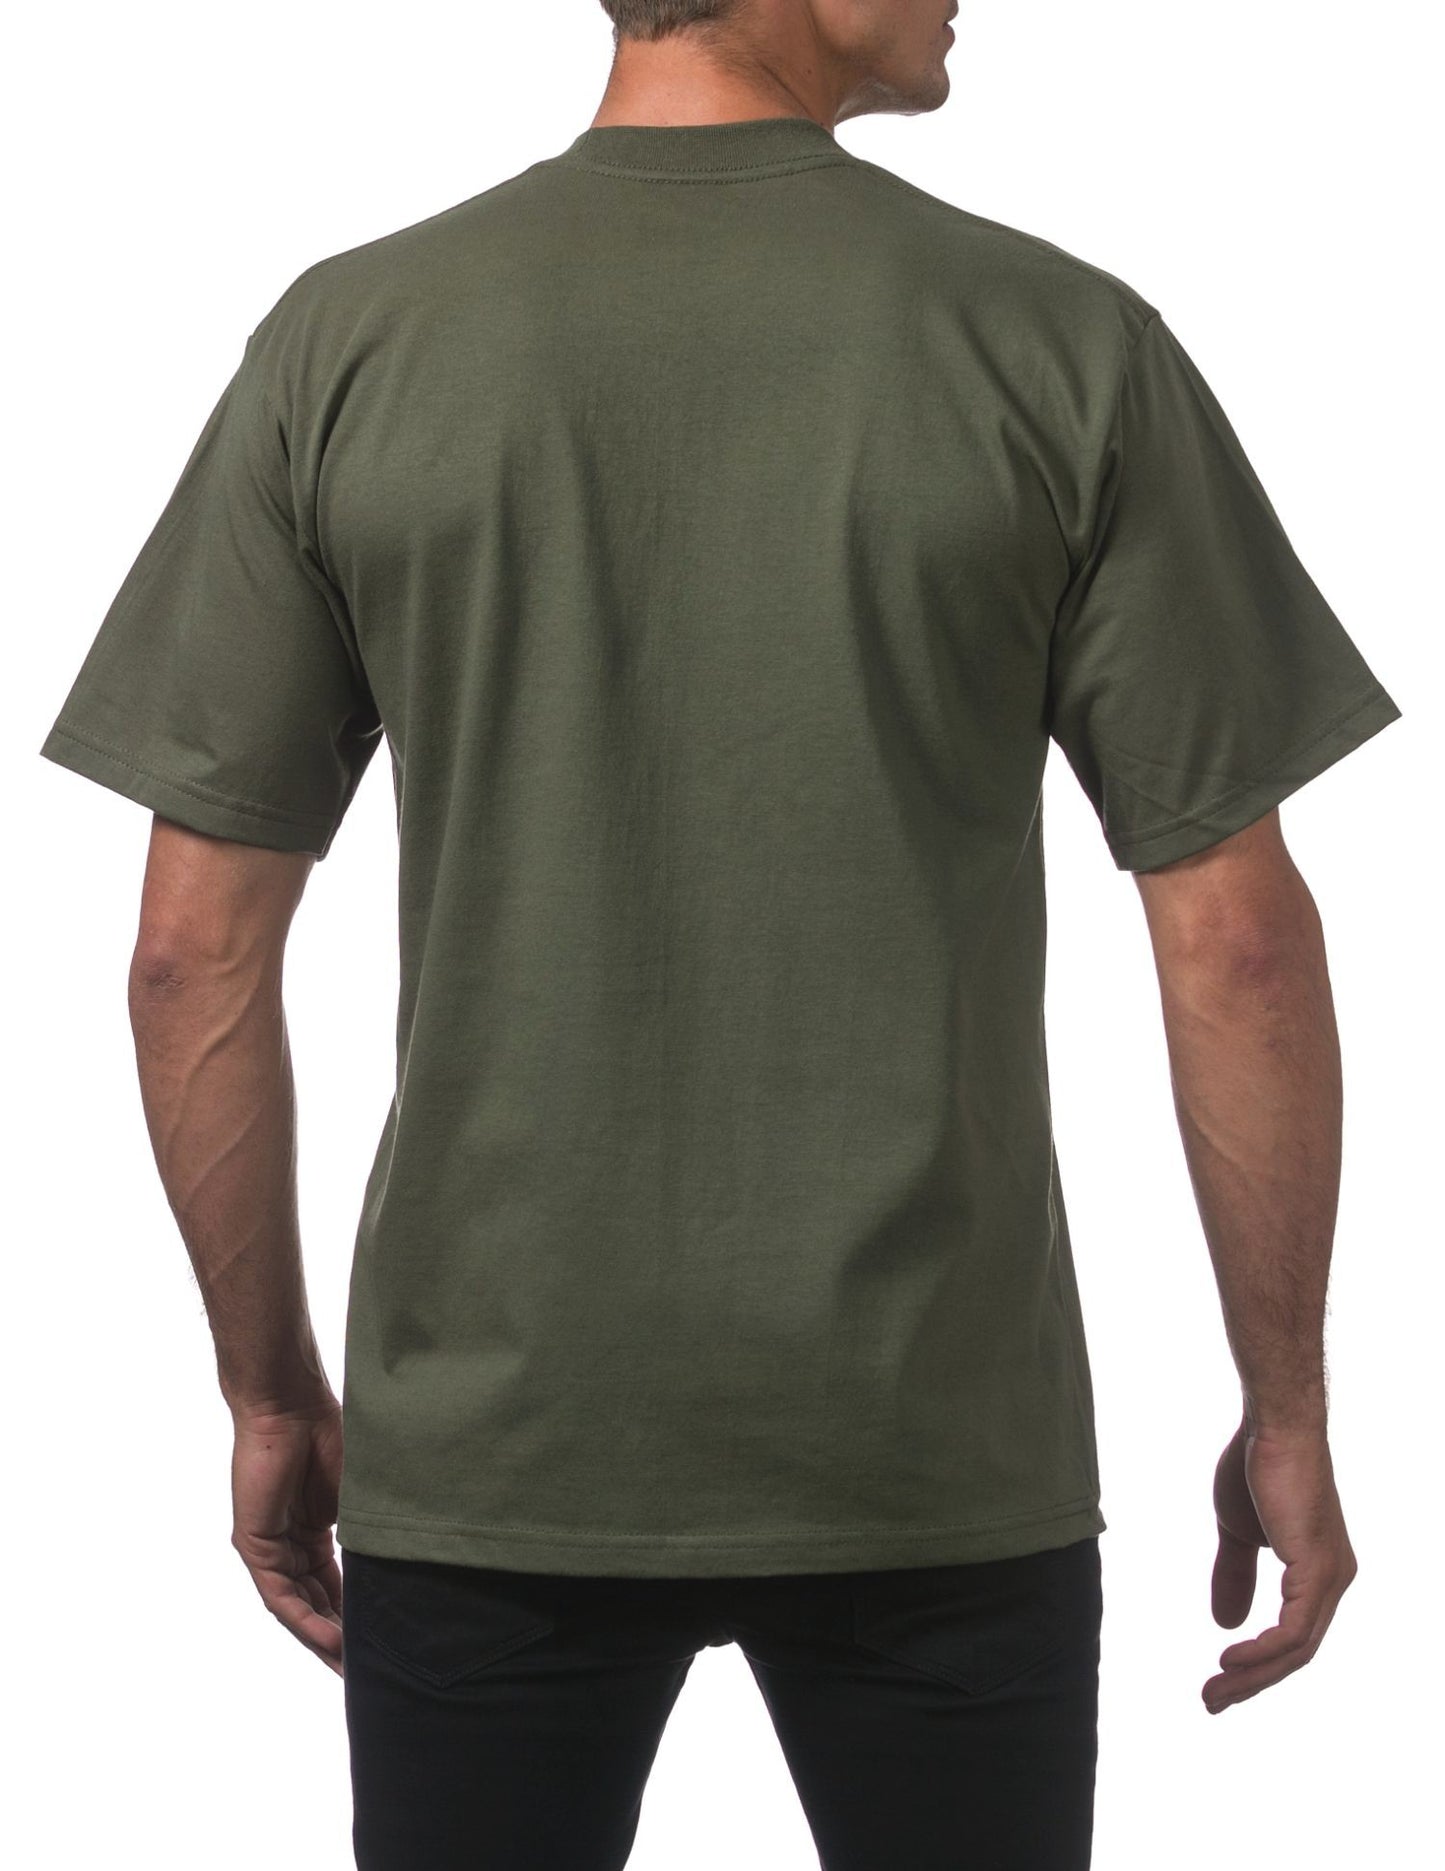 PRO CLUB Heavy Weight Short Sleeve T-shirt (Olive Green)